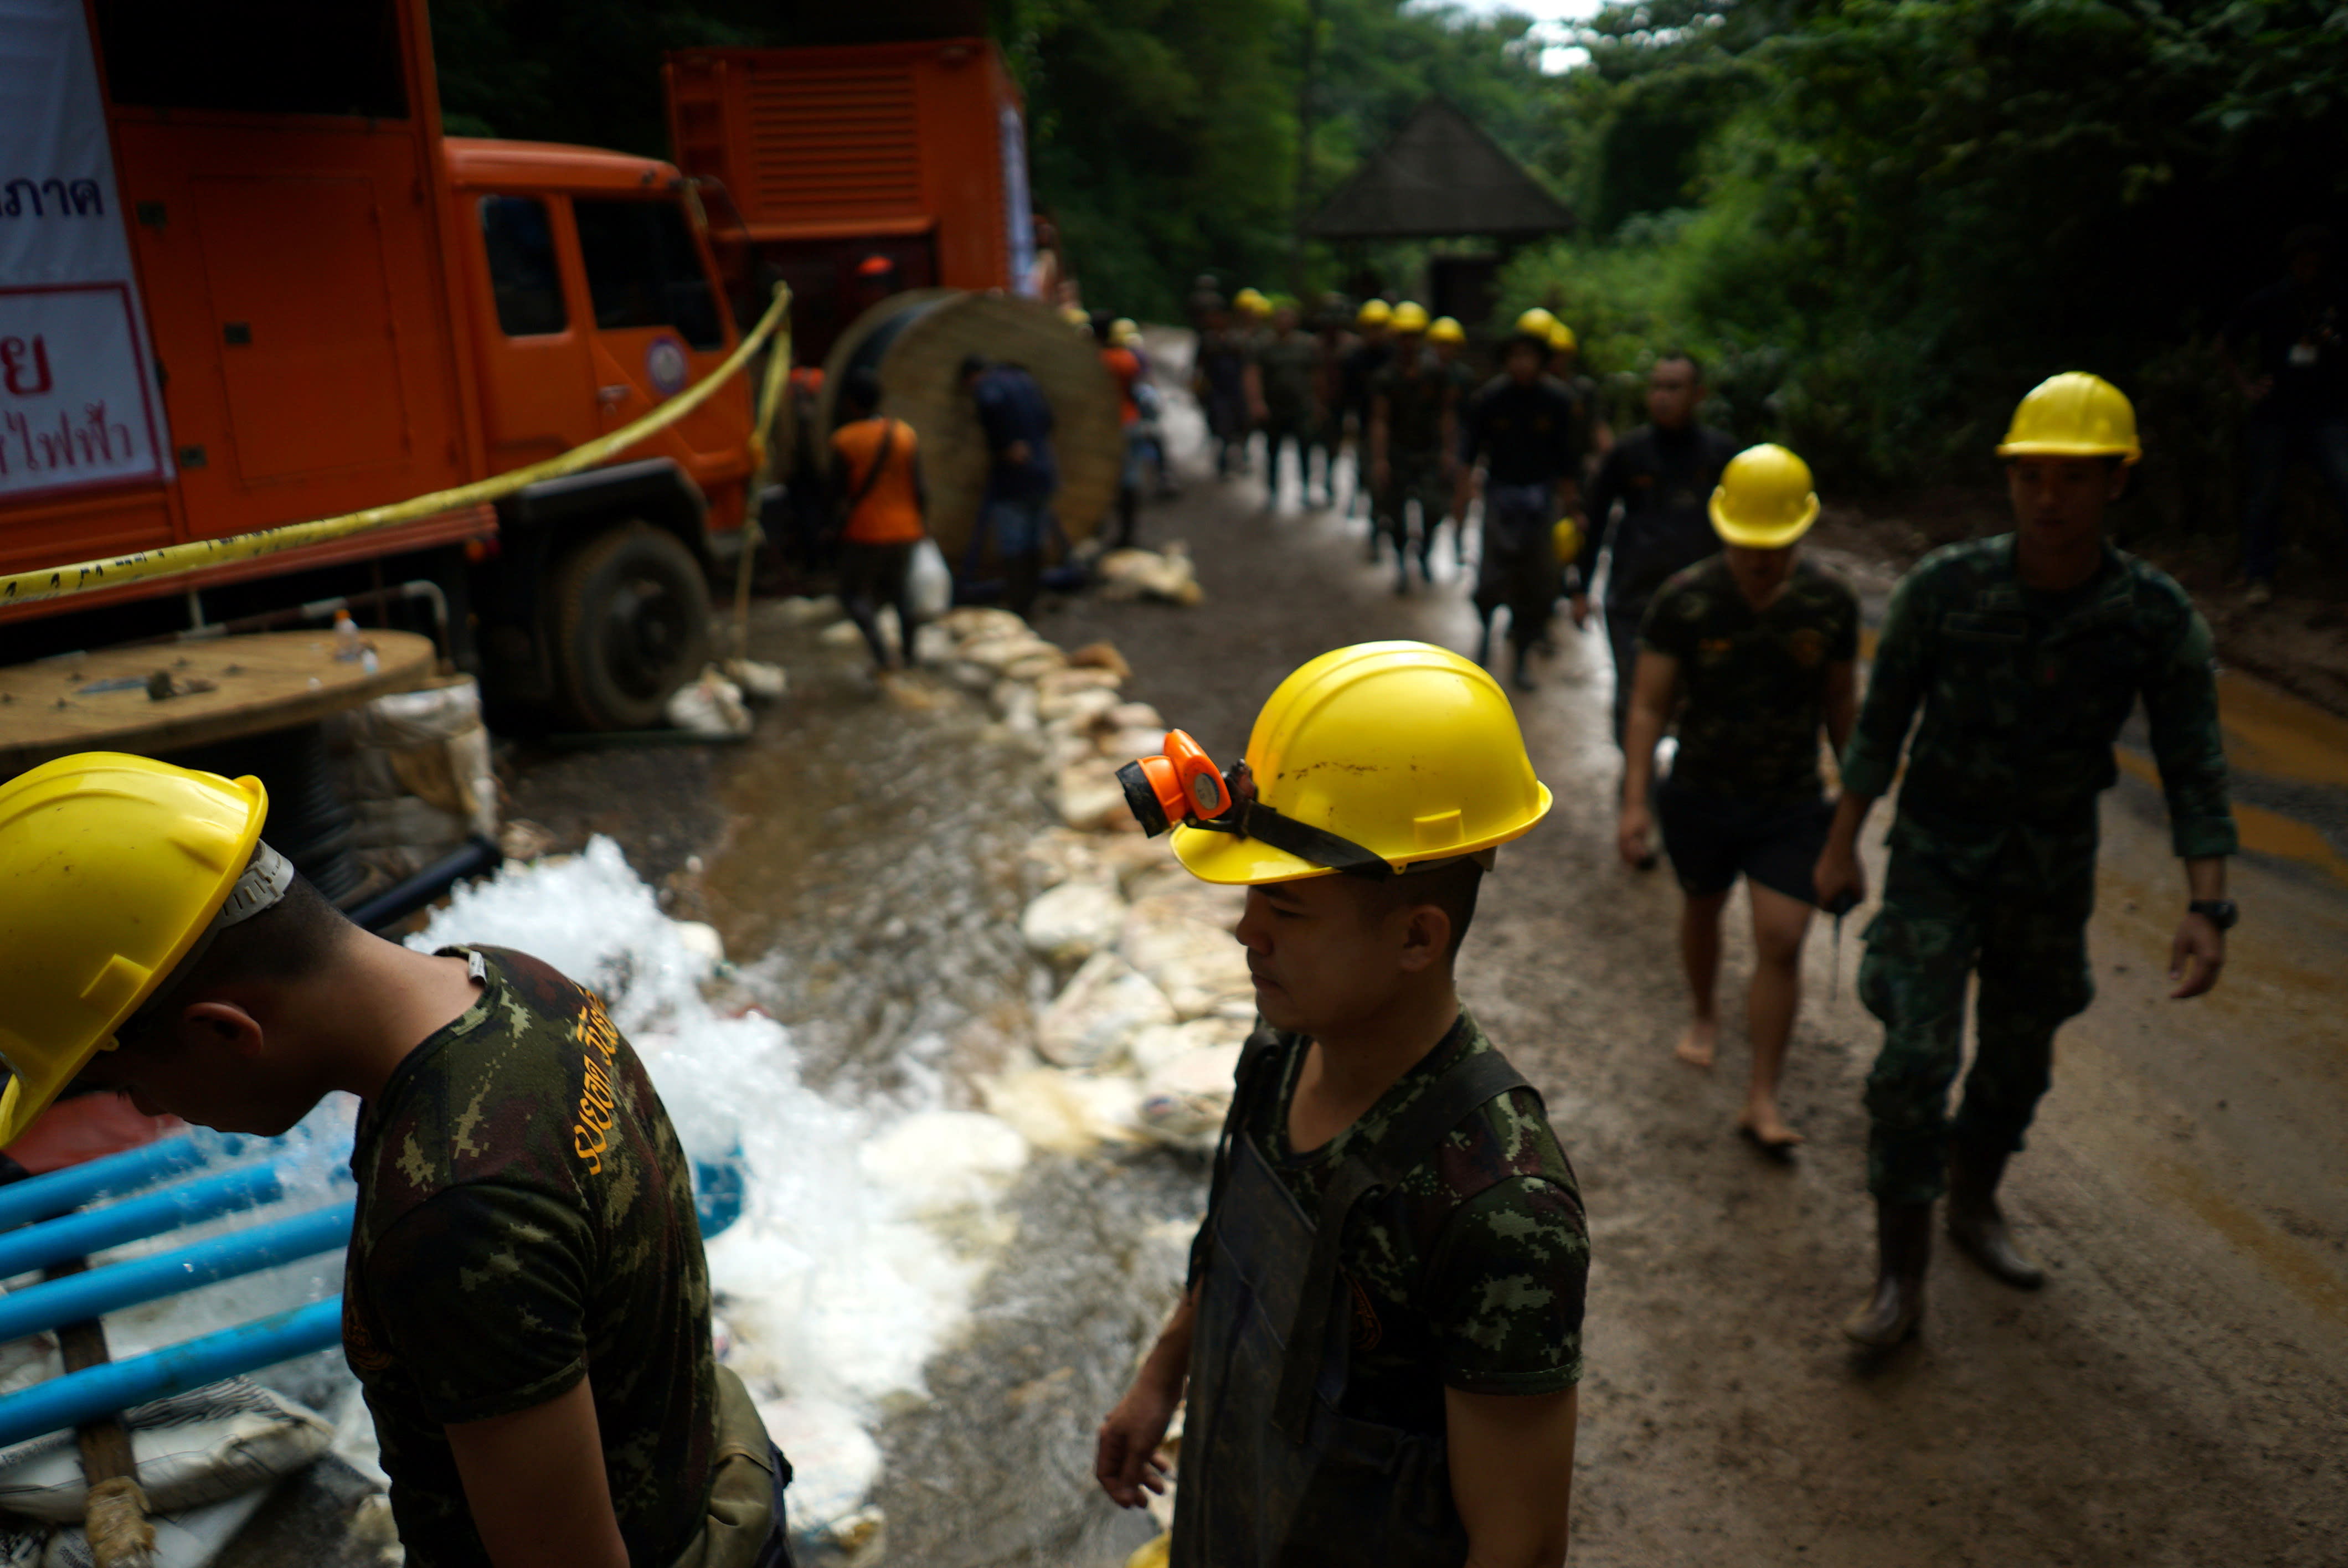 Military personnel walk in line as they prepare to enter the Tham Luang cave complex, where 12 boys and their soccer coach are trapped, in the northern province of Chiang Rai, Thailand, July 6, 2018 (REUTERS/Athit Perawongmetha)